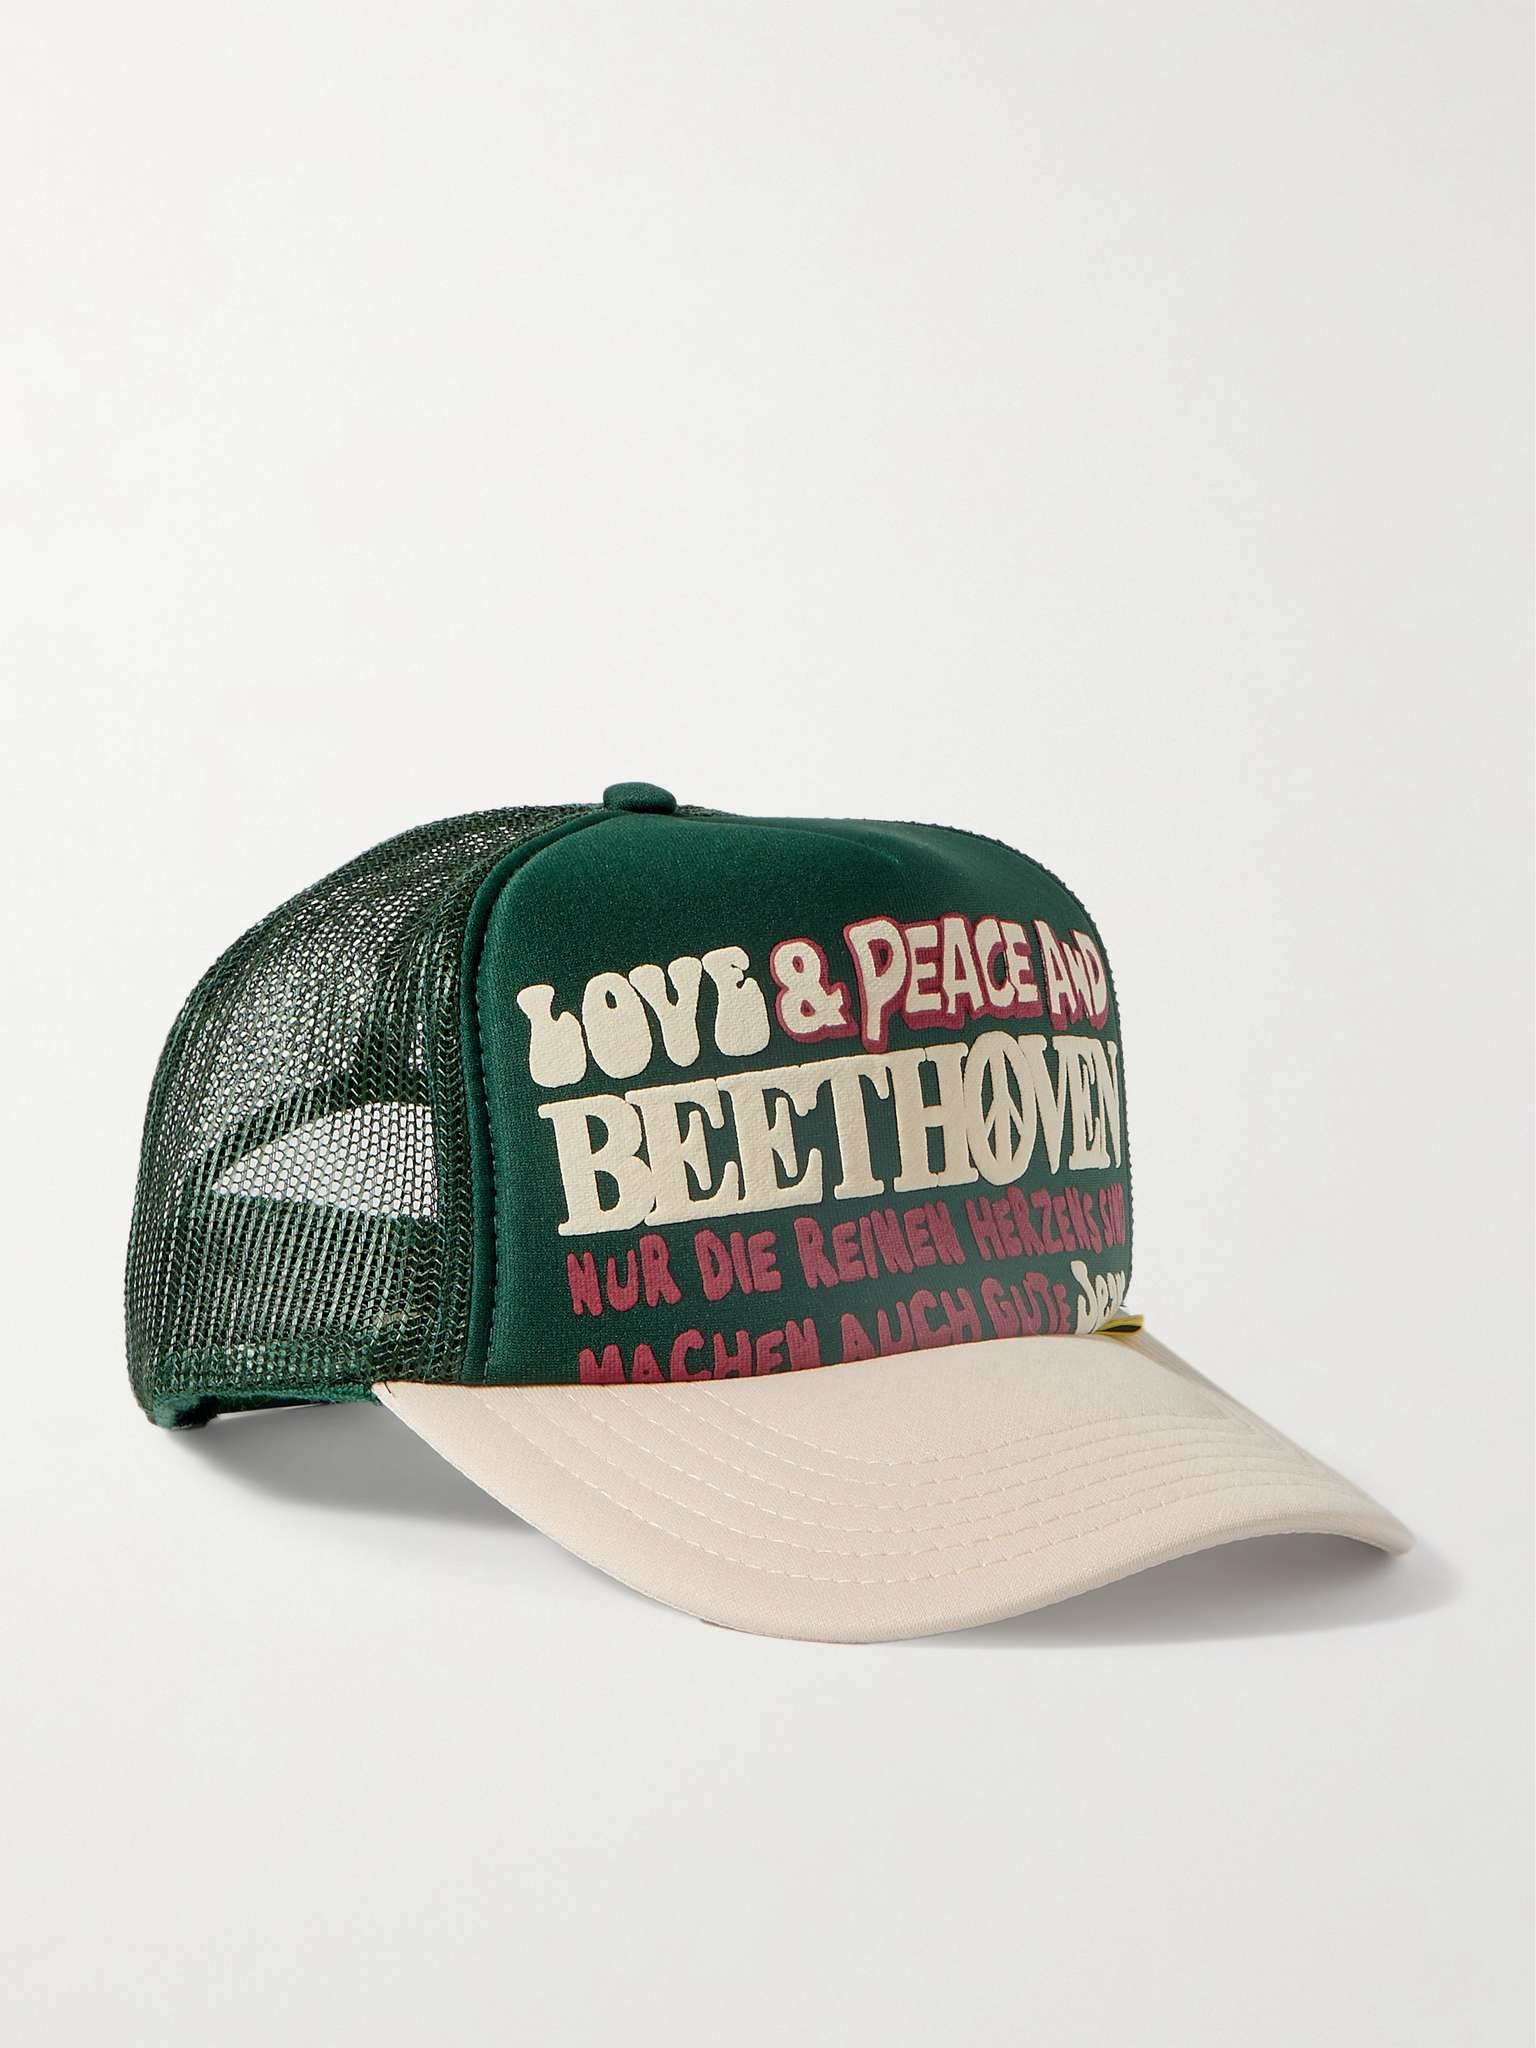 Love & Peace and Beethoven Printed Neoprene and Mesh Trucker Cap - 1